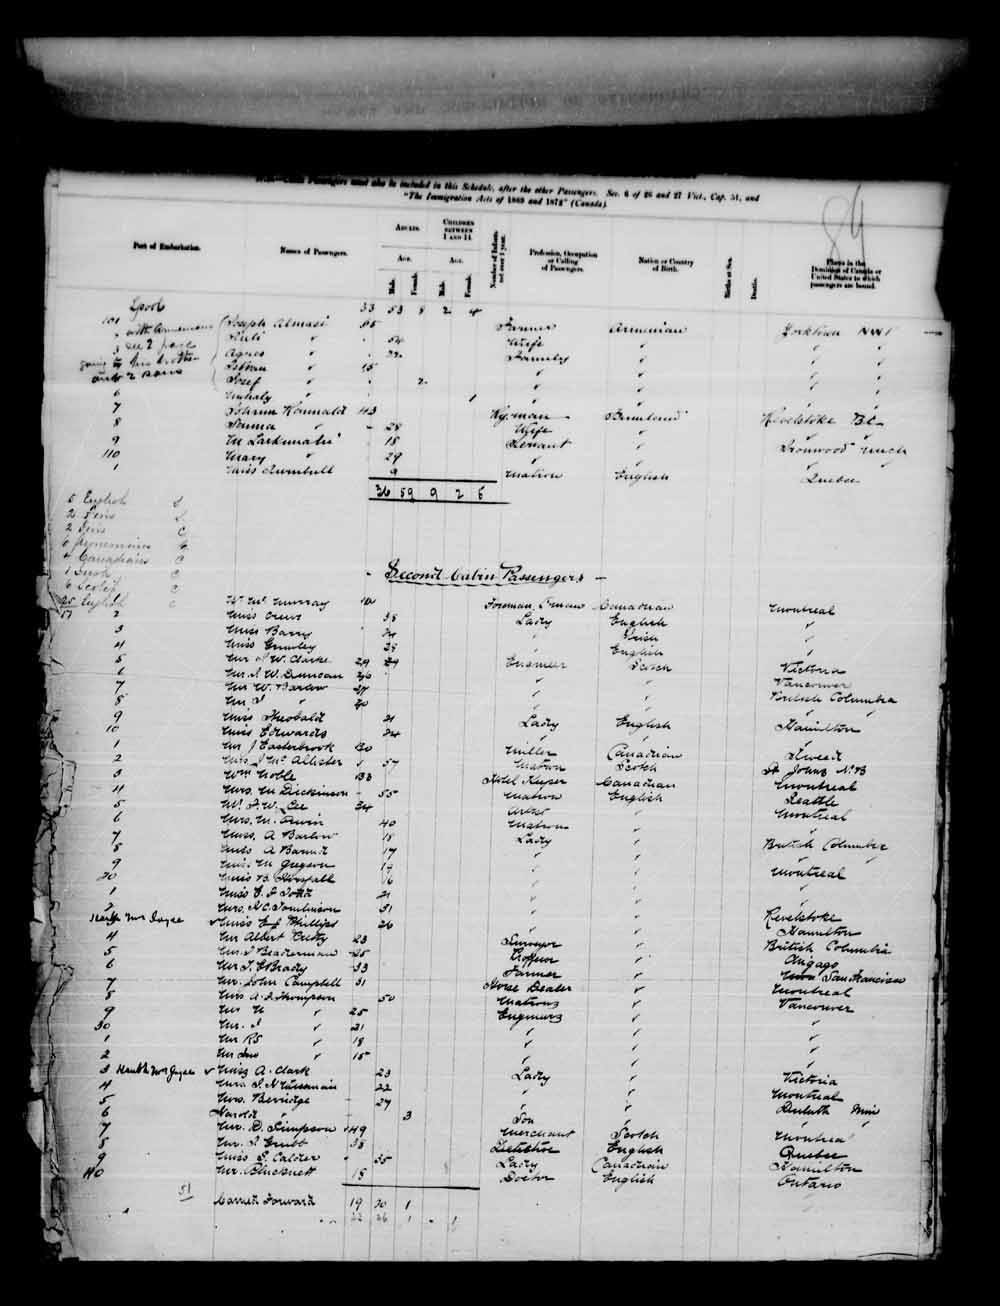 Digitized page of Passenger Lists for Image No.: e003555391